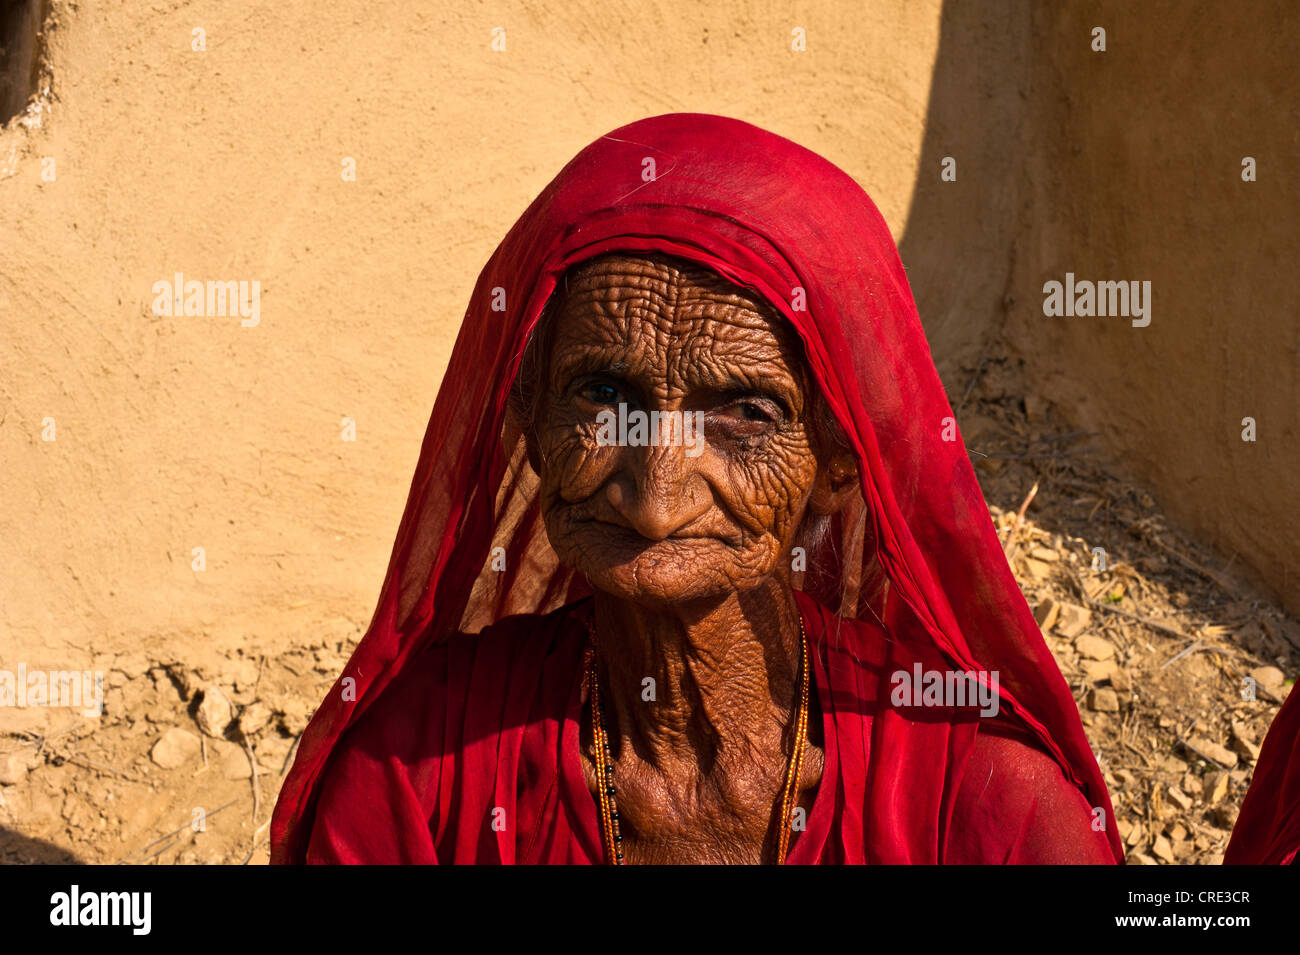 Elderly woman wearing a red head scarf and with many wrinkles on her face, portrait, Thar Desert, Rajasthan, India, Asia Stock Photo